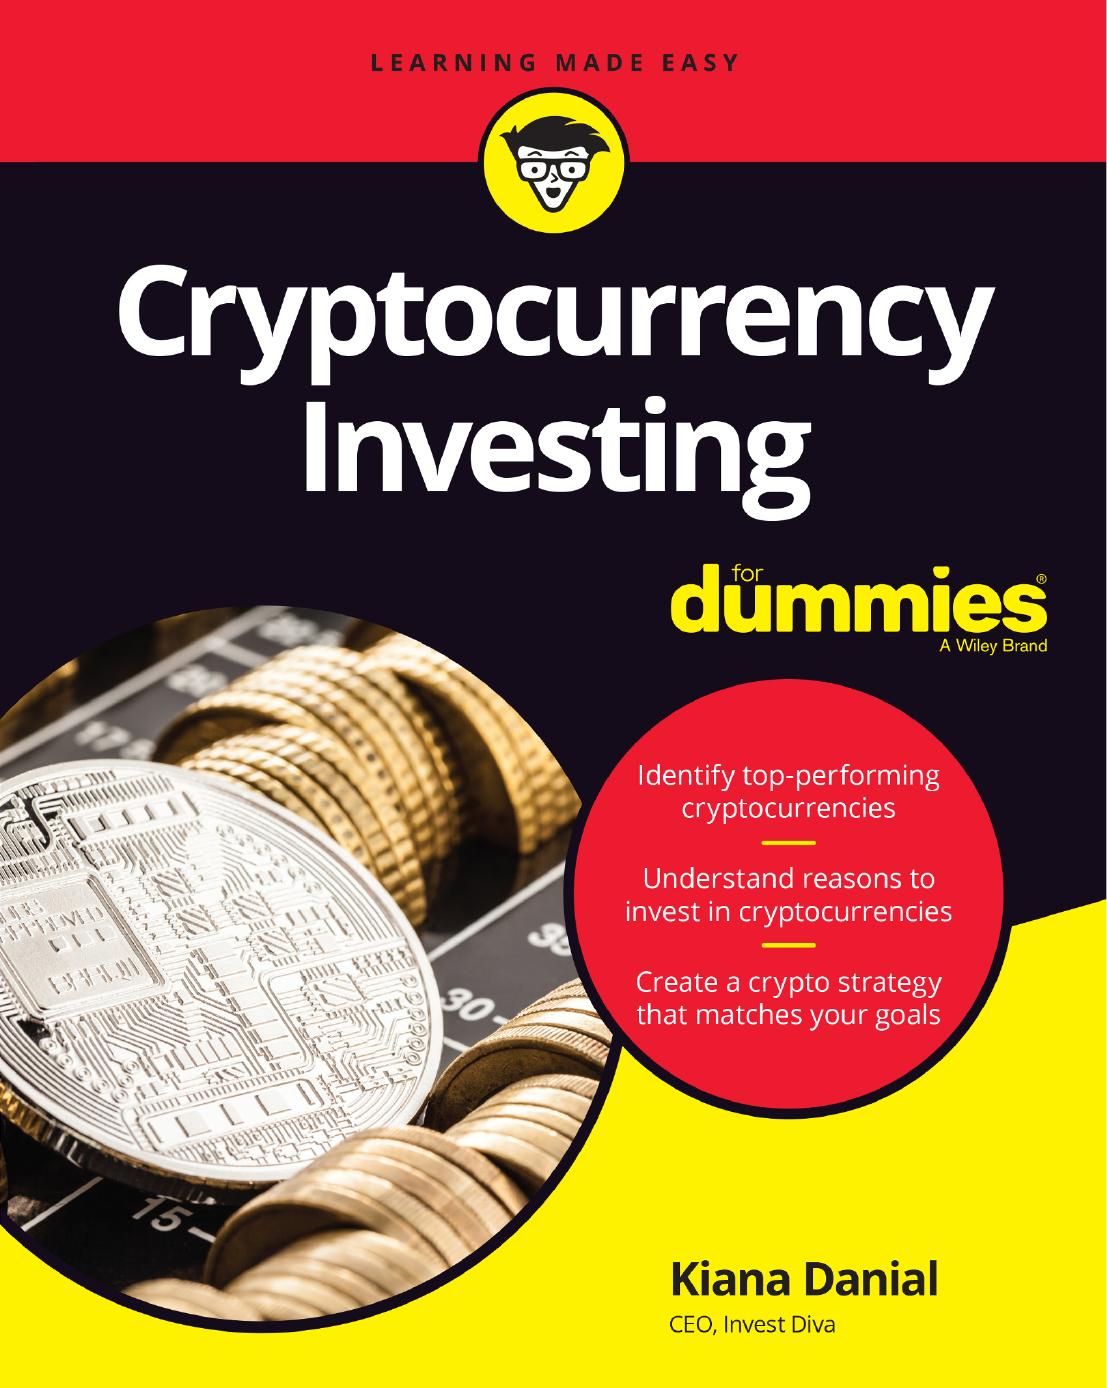 Cryptocurrency investing for dummies pdf volume explained coindesk to calculate market cap for